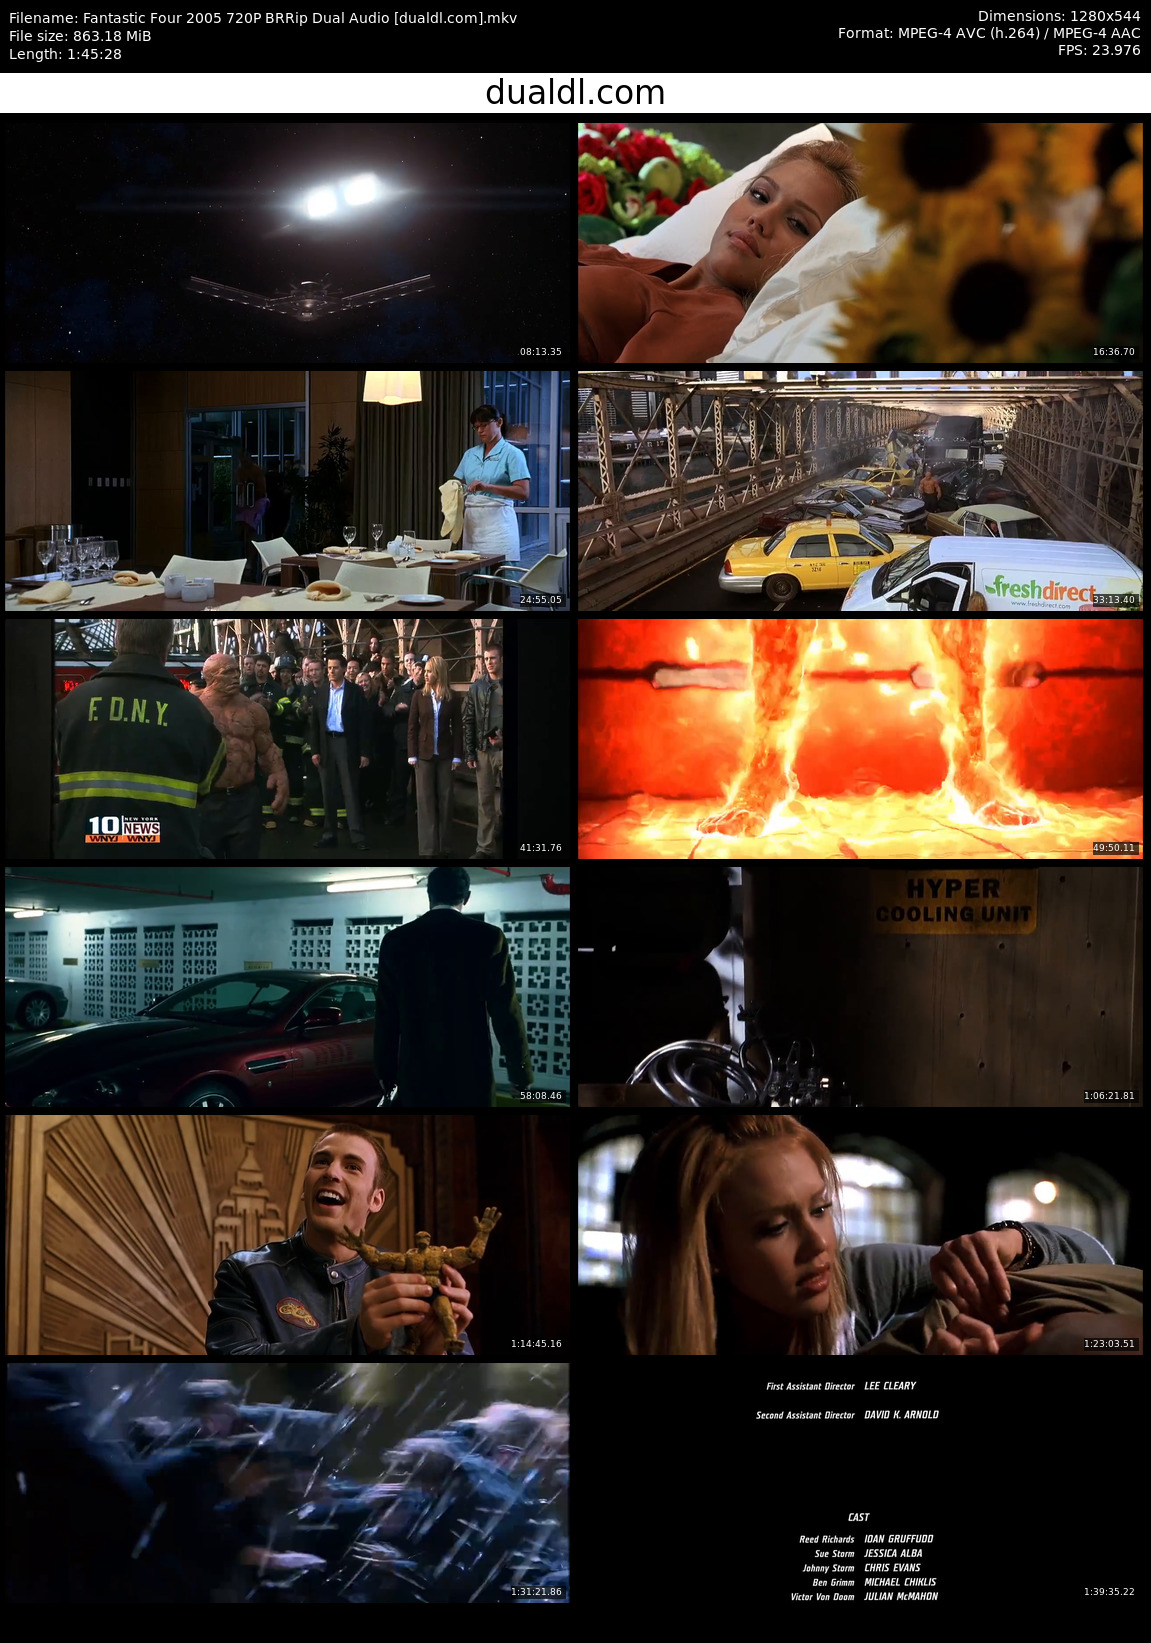 Fantastic Four Full Movie Free in English and Hindi Dubbed HD 720P